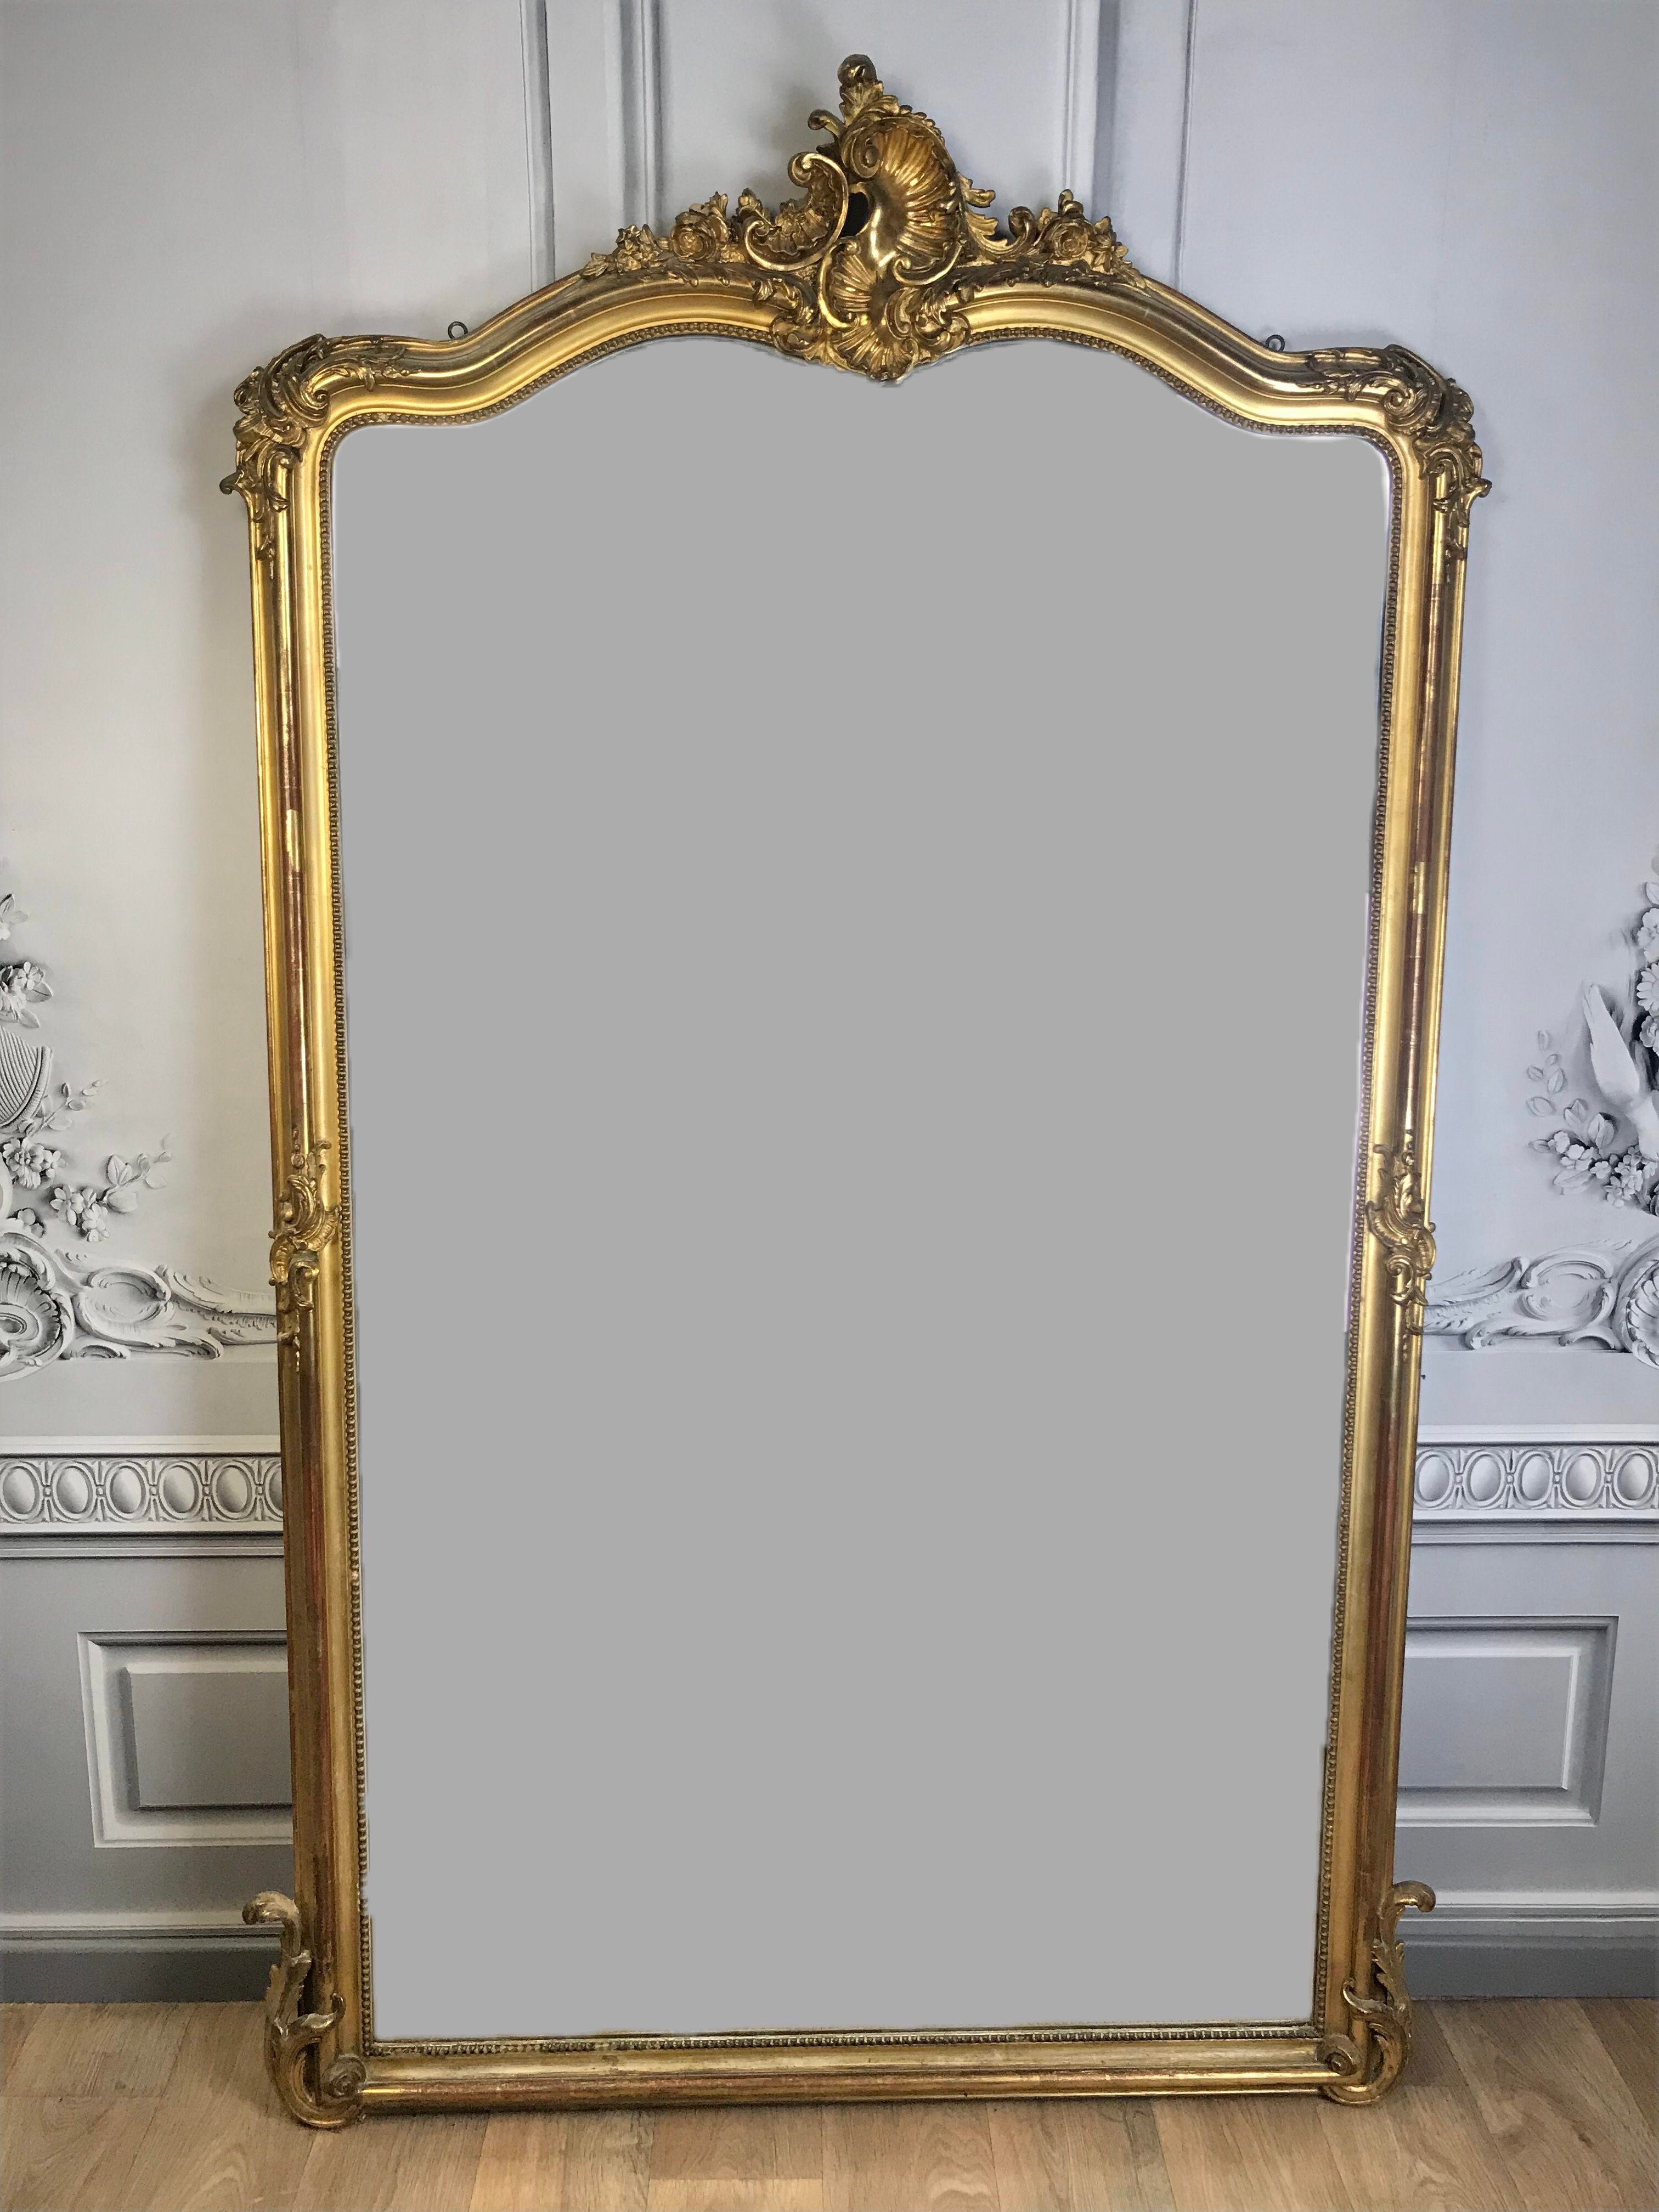 LOUIS XV STYLE CARVED GILT WOOD